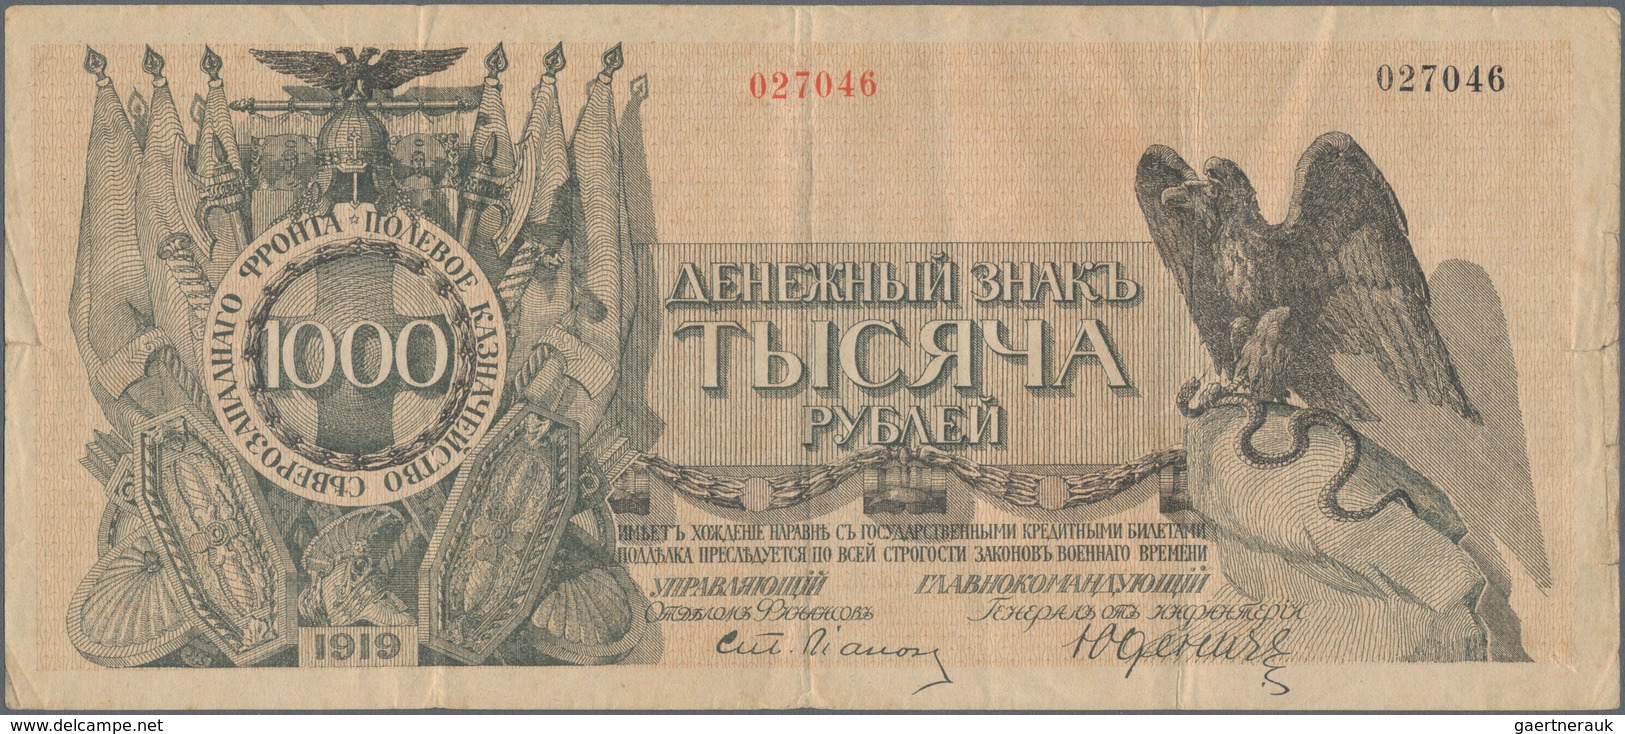 Russia / Russland: Northwest Russia, set with 10 banknotes 25, 50 Kopeks, 1, 3, 5, 10, 25, 100, 500